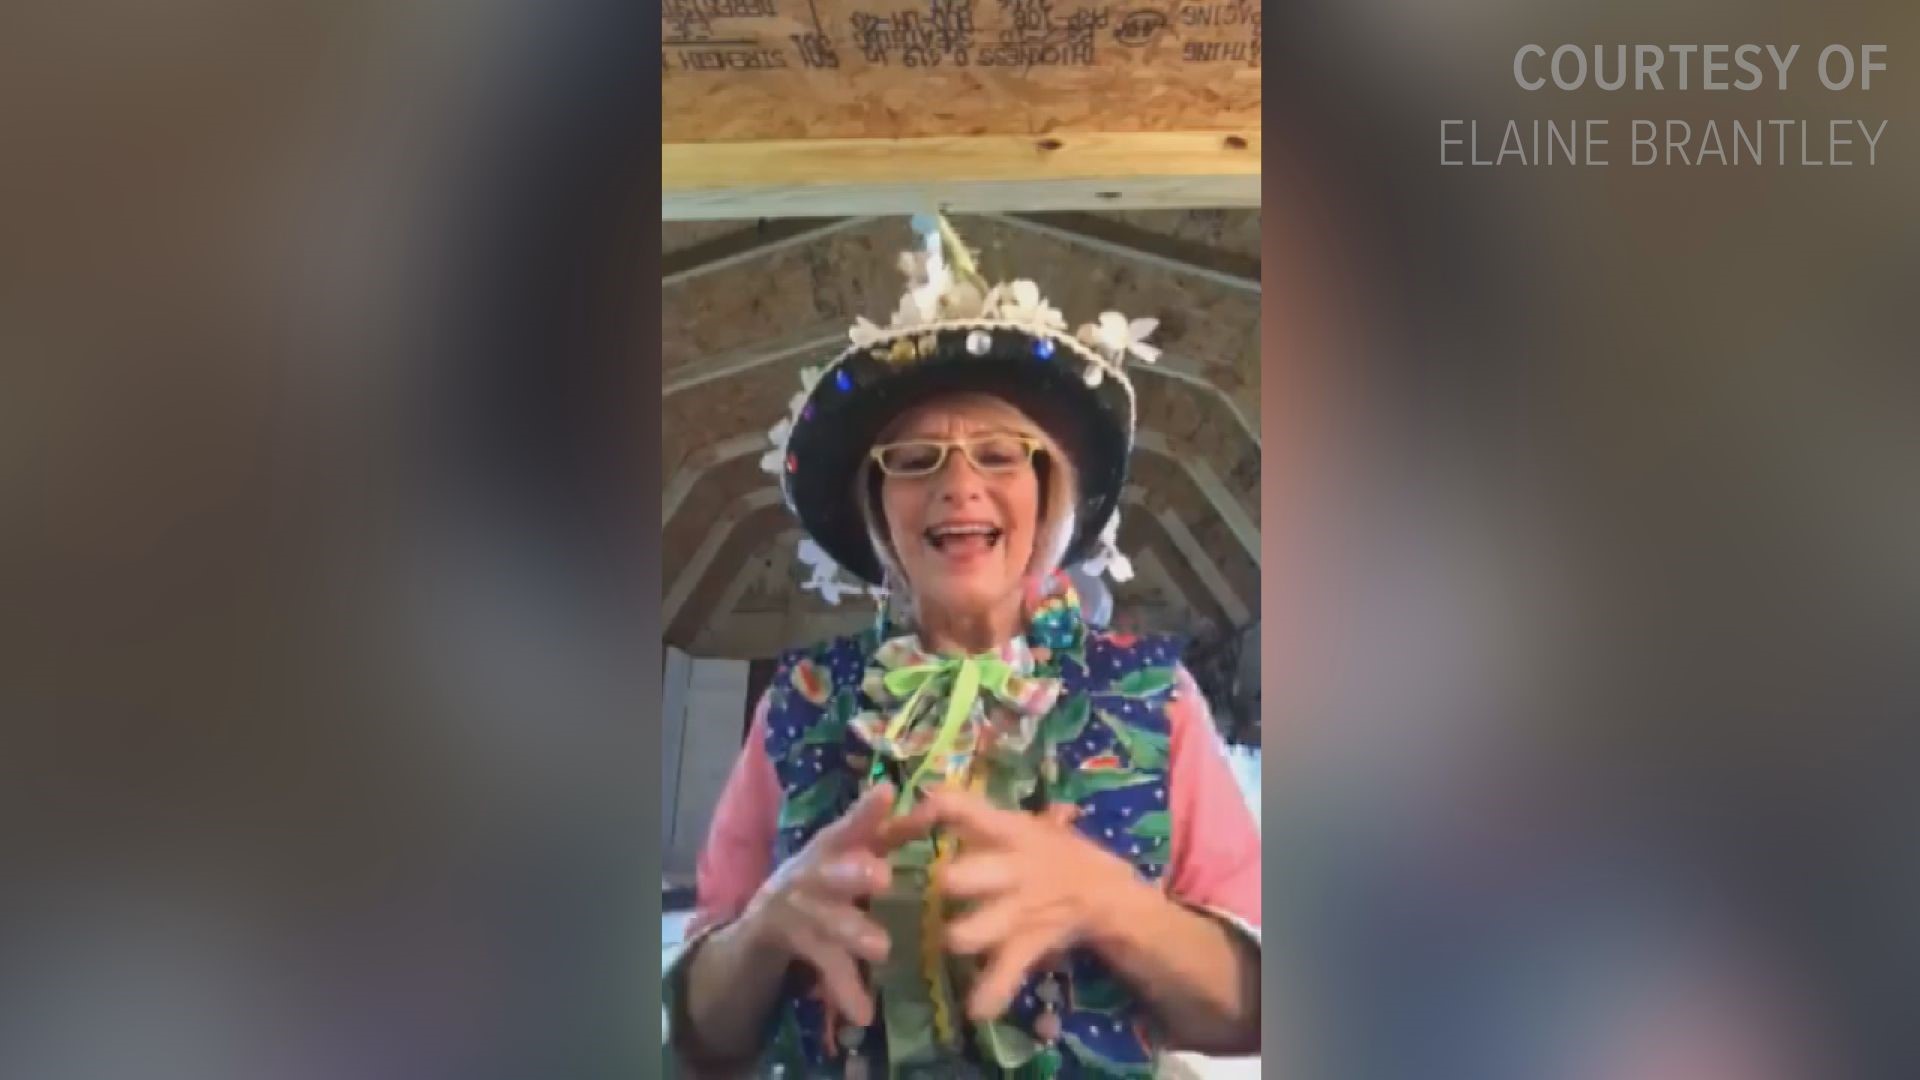 Elaine Brantley spoofs life today with her Christian comedy songs